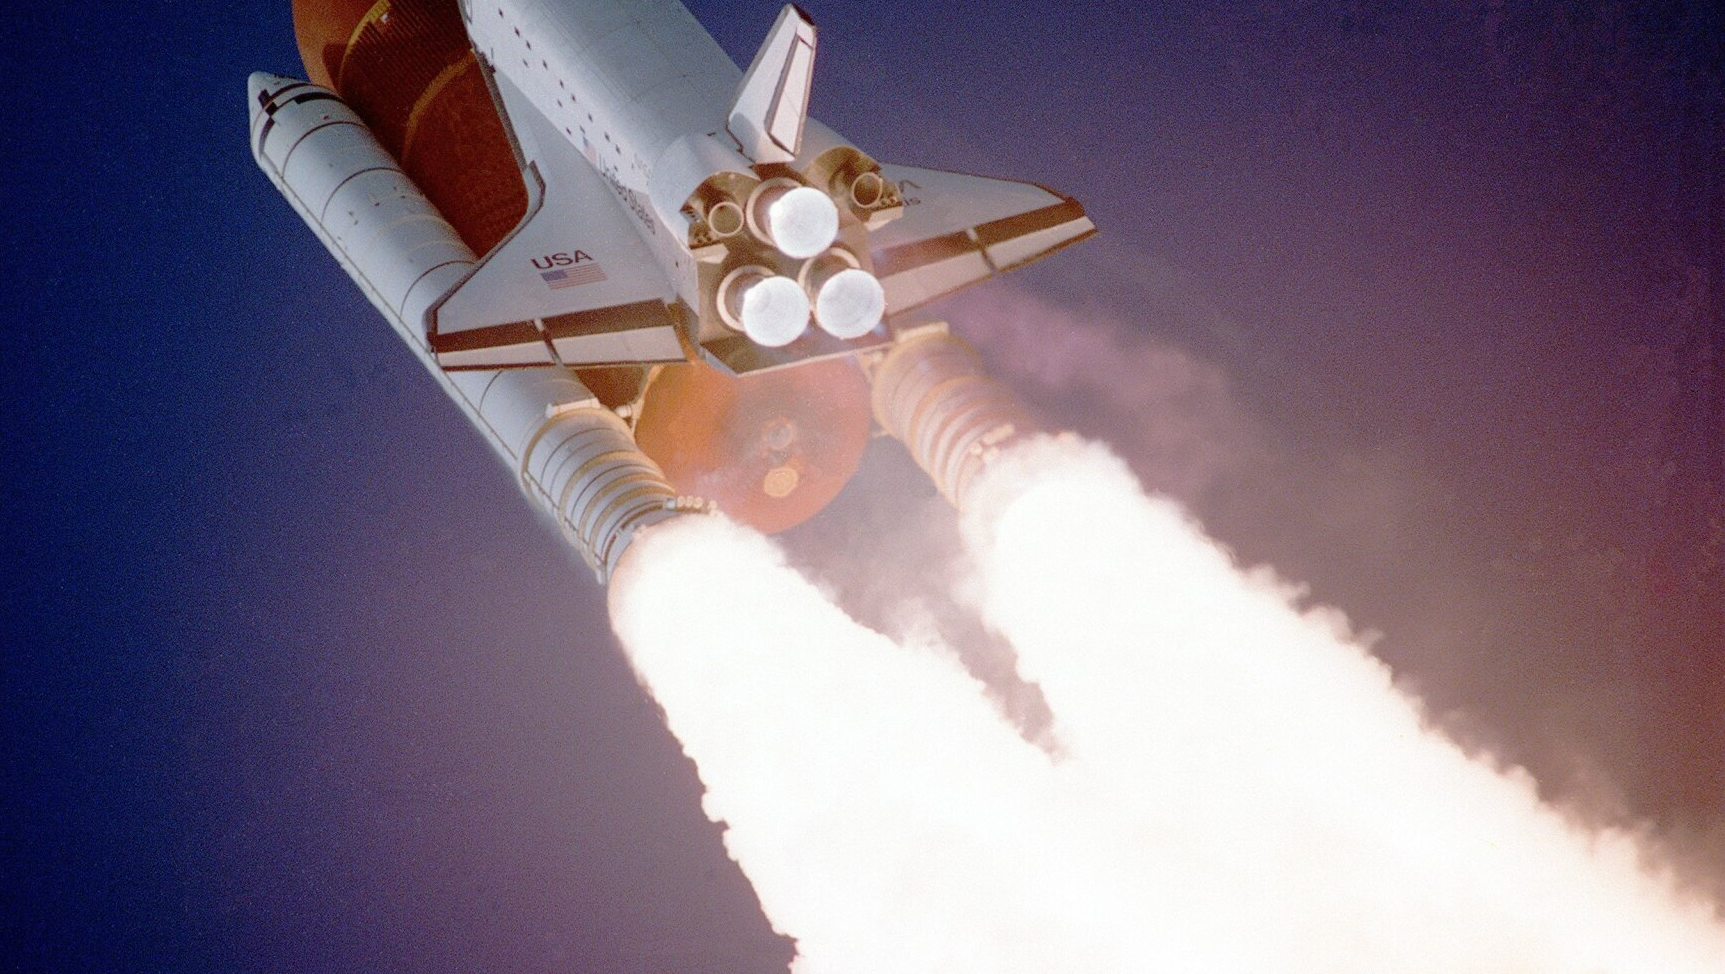 A voyager rocket, white hot fuel tanks blasting through the atmosphere into space